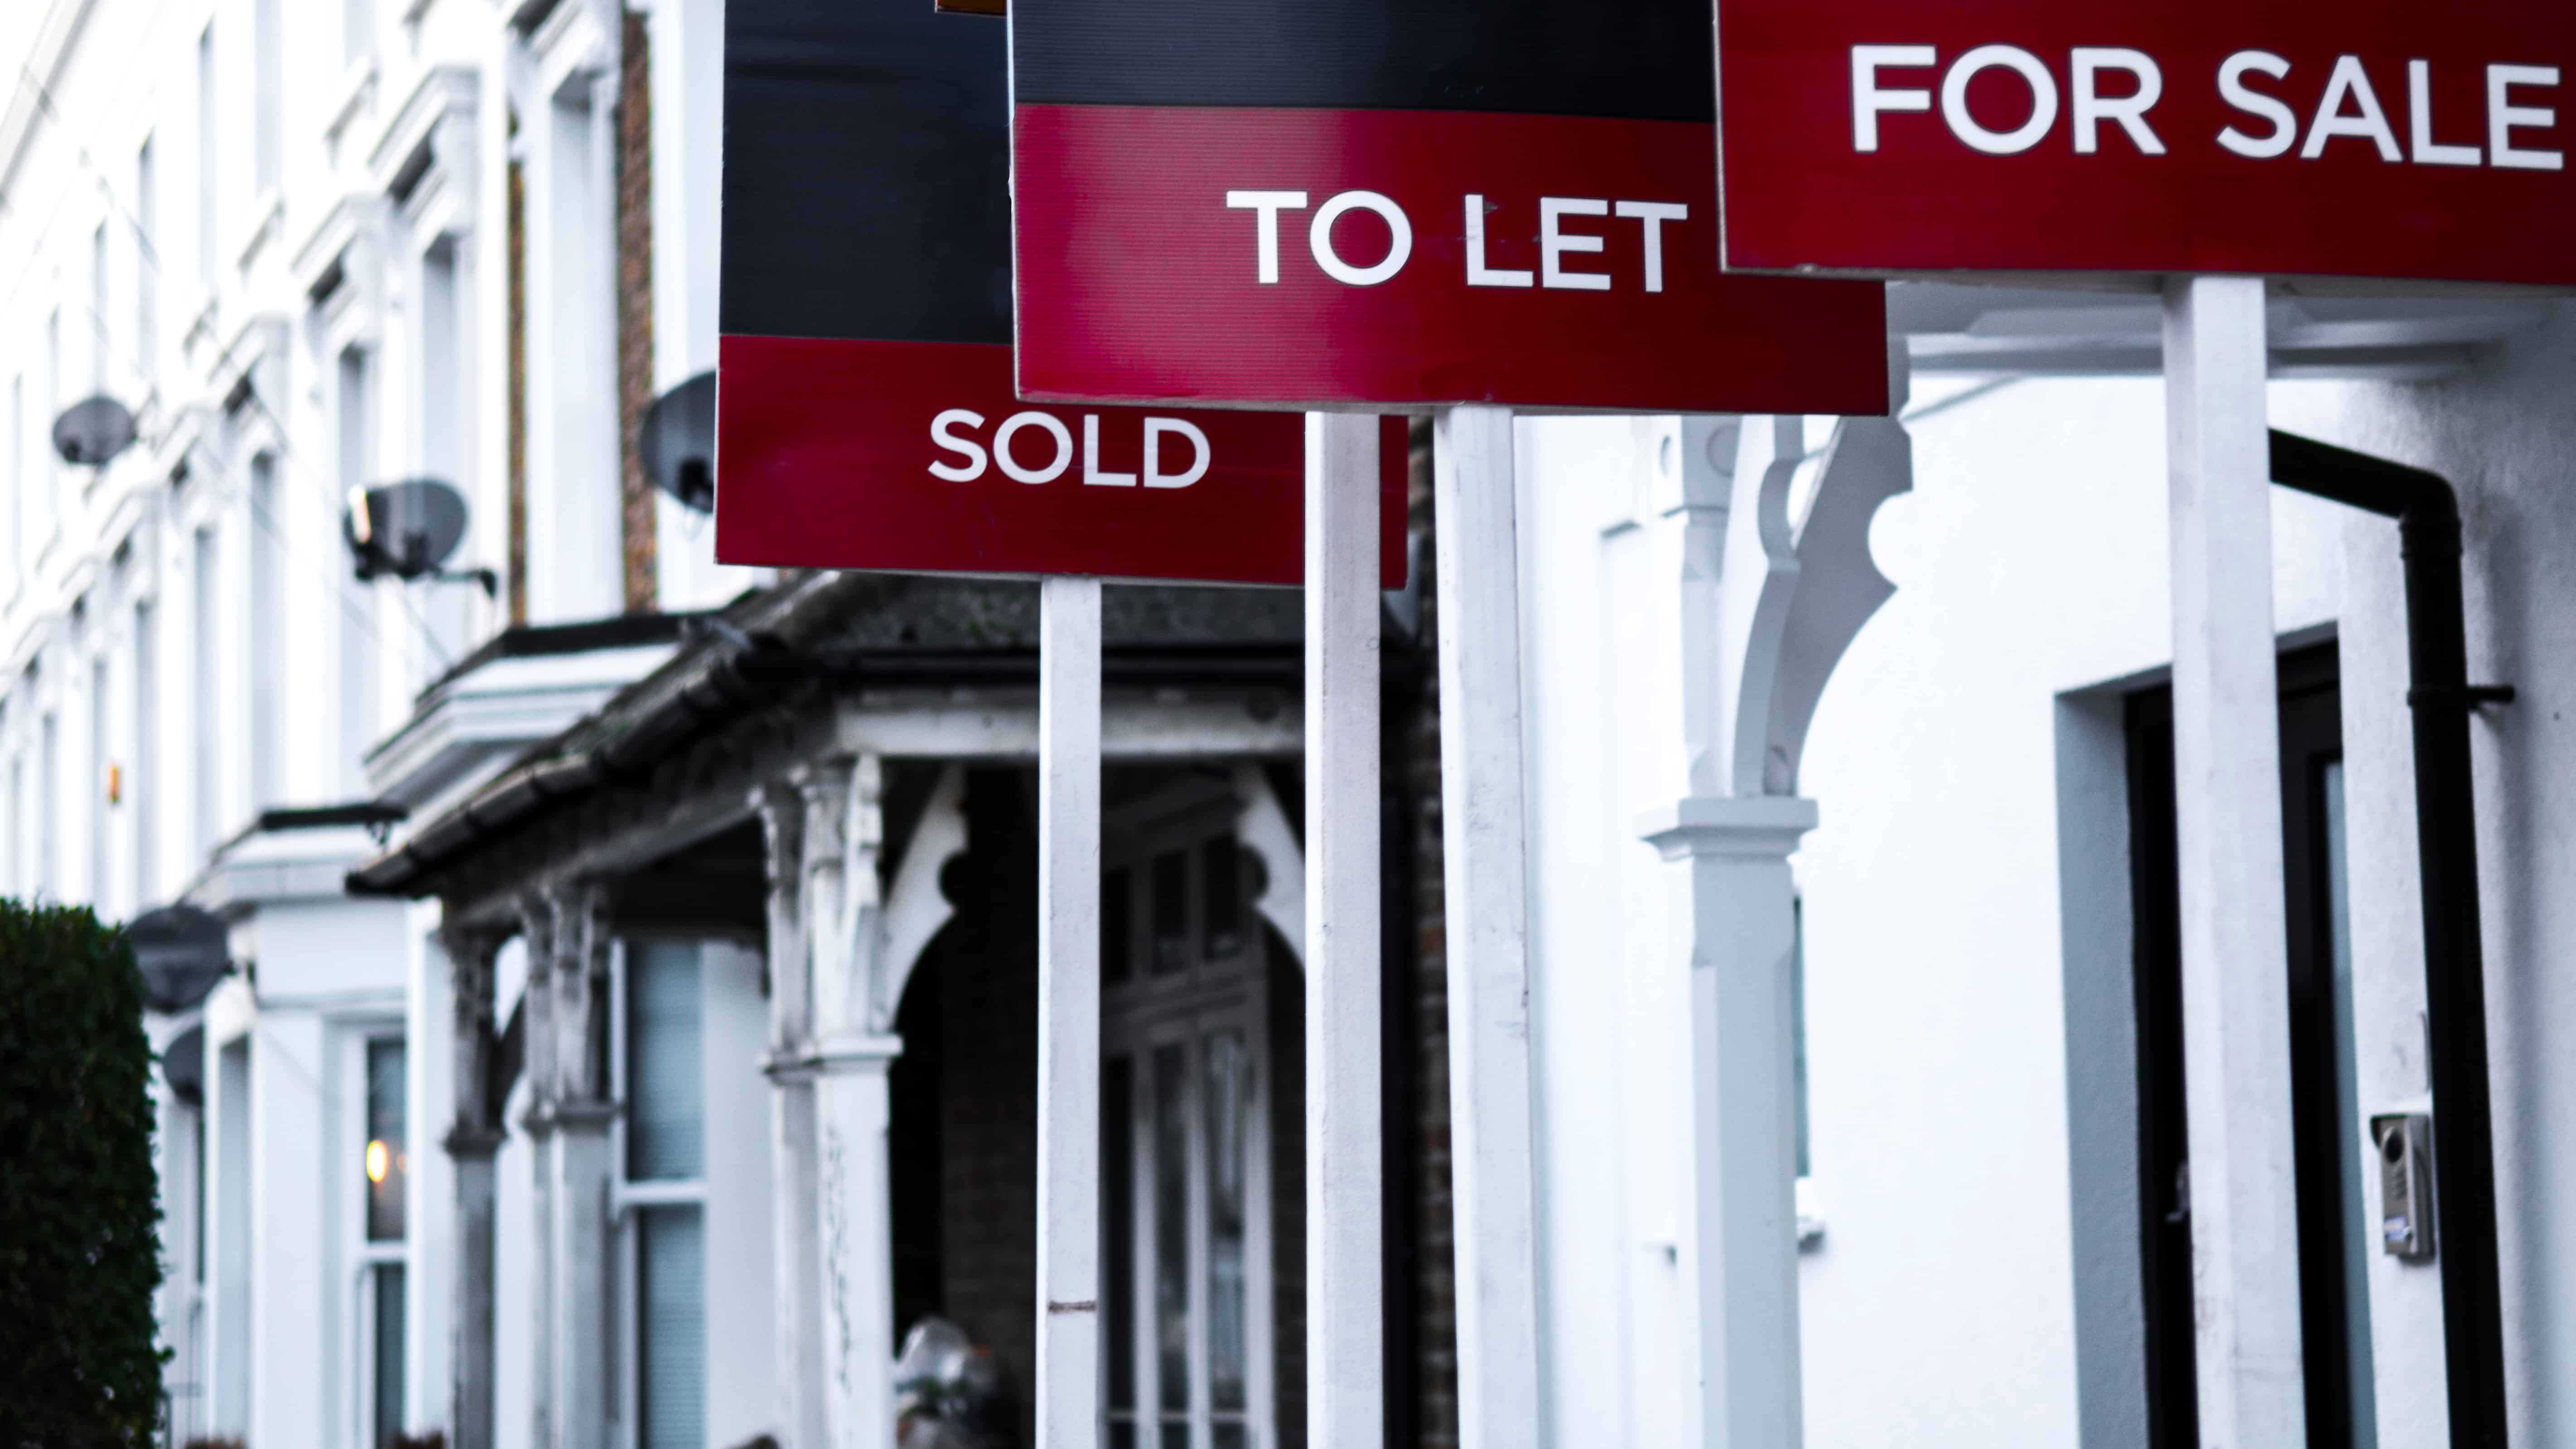 Paragon Bank sees buy-to-let lending growth